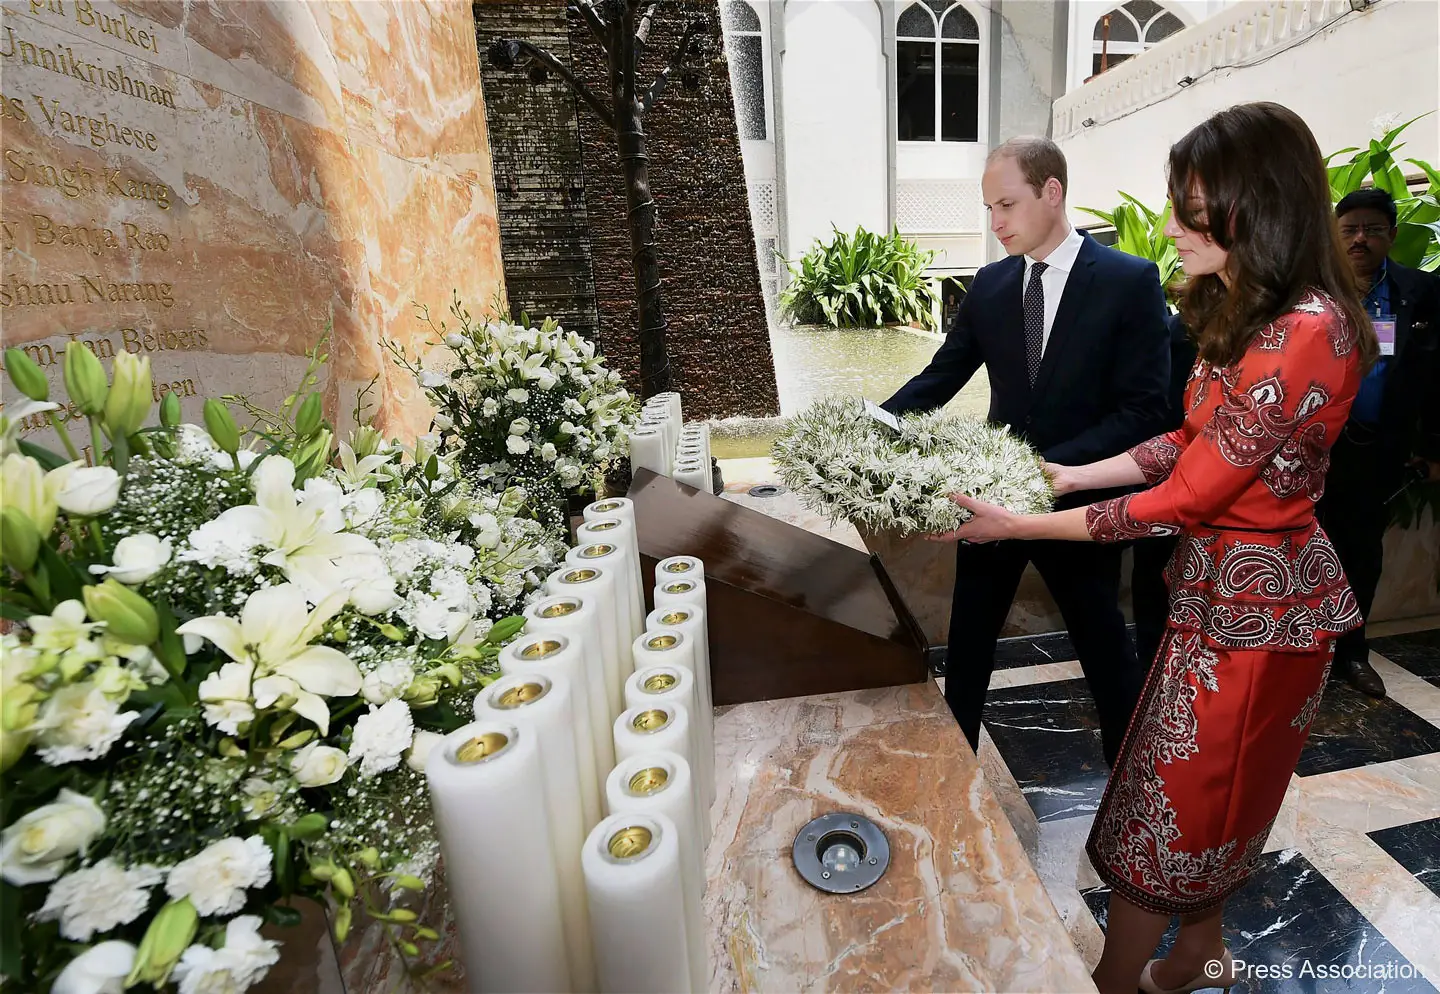 The Duke and Duchess of Cambridge paid tribute to the victims of 2008 attack